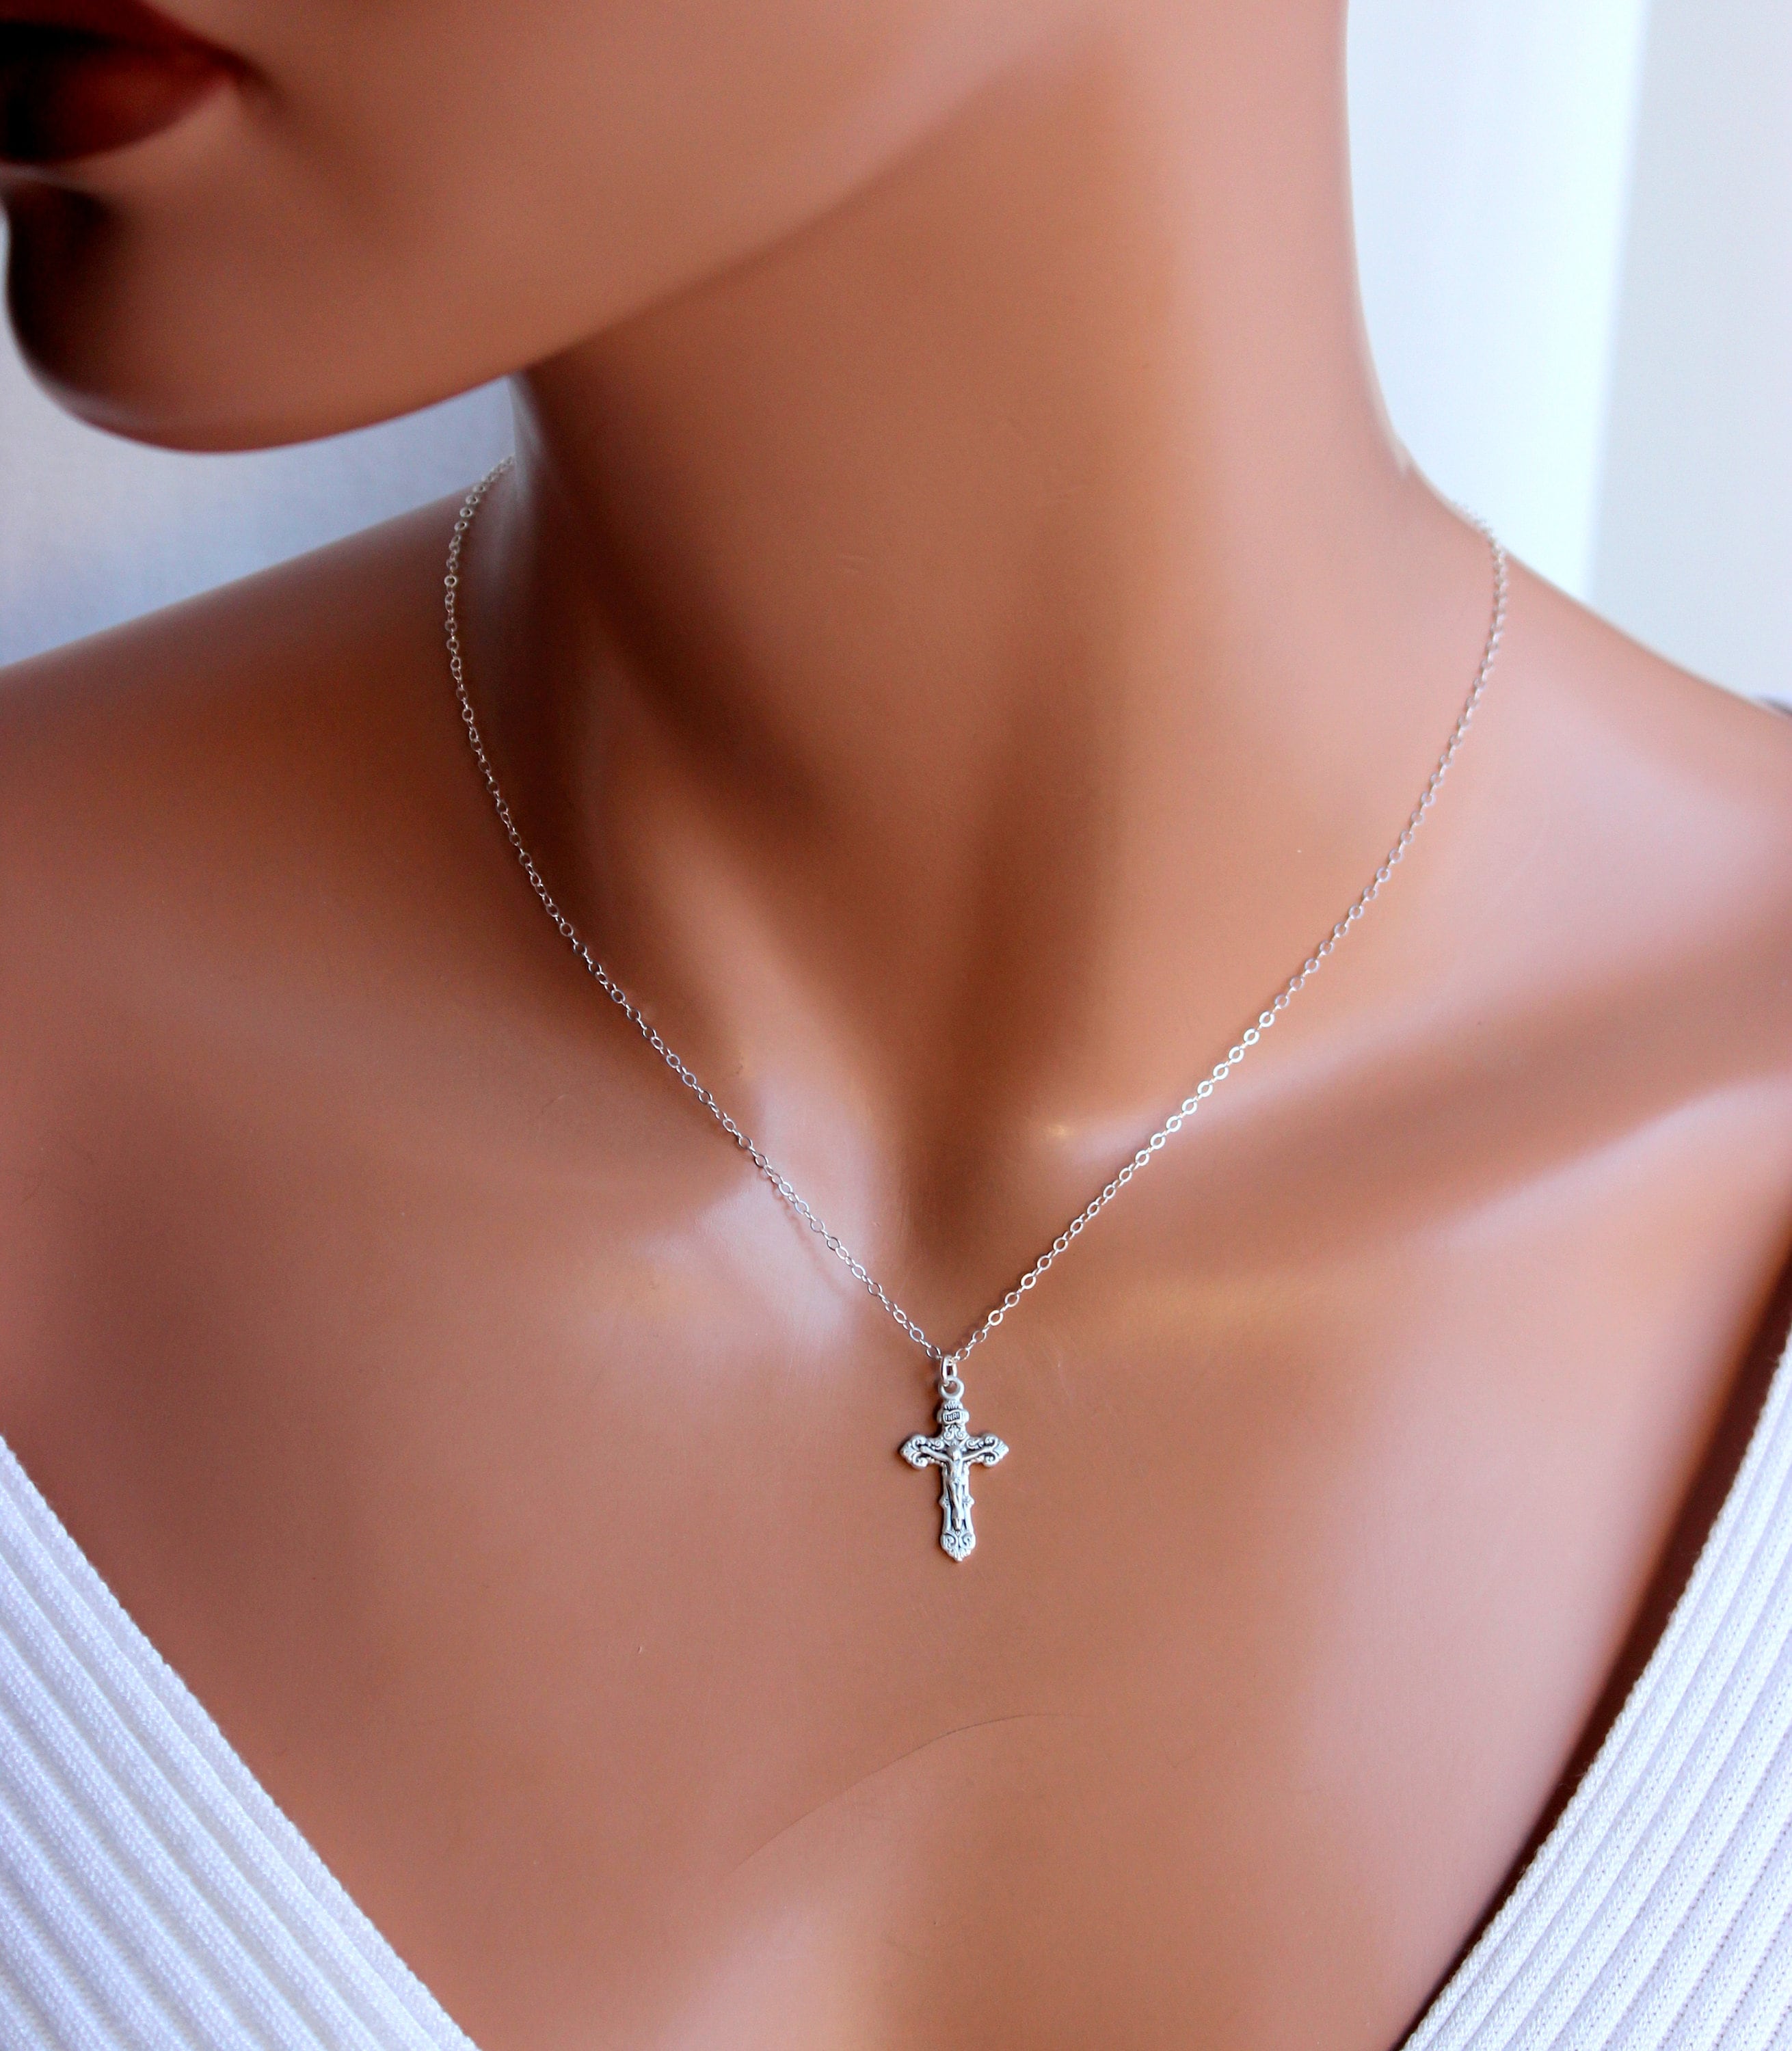 Buy LADY HAWK Metal Holy Cross Pendant Crucifix Necklace with Resizable  Silver Chain for Boys, Girls, Women and Men (LH-JCC-D1) at Amazon.in